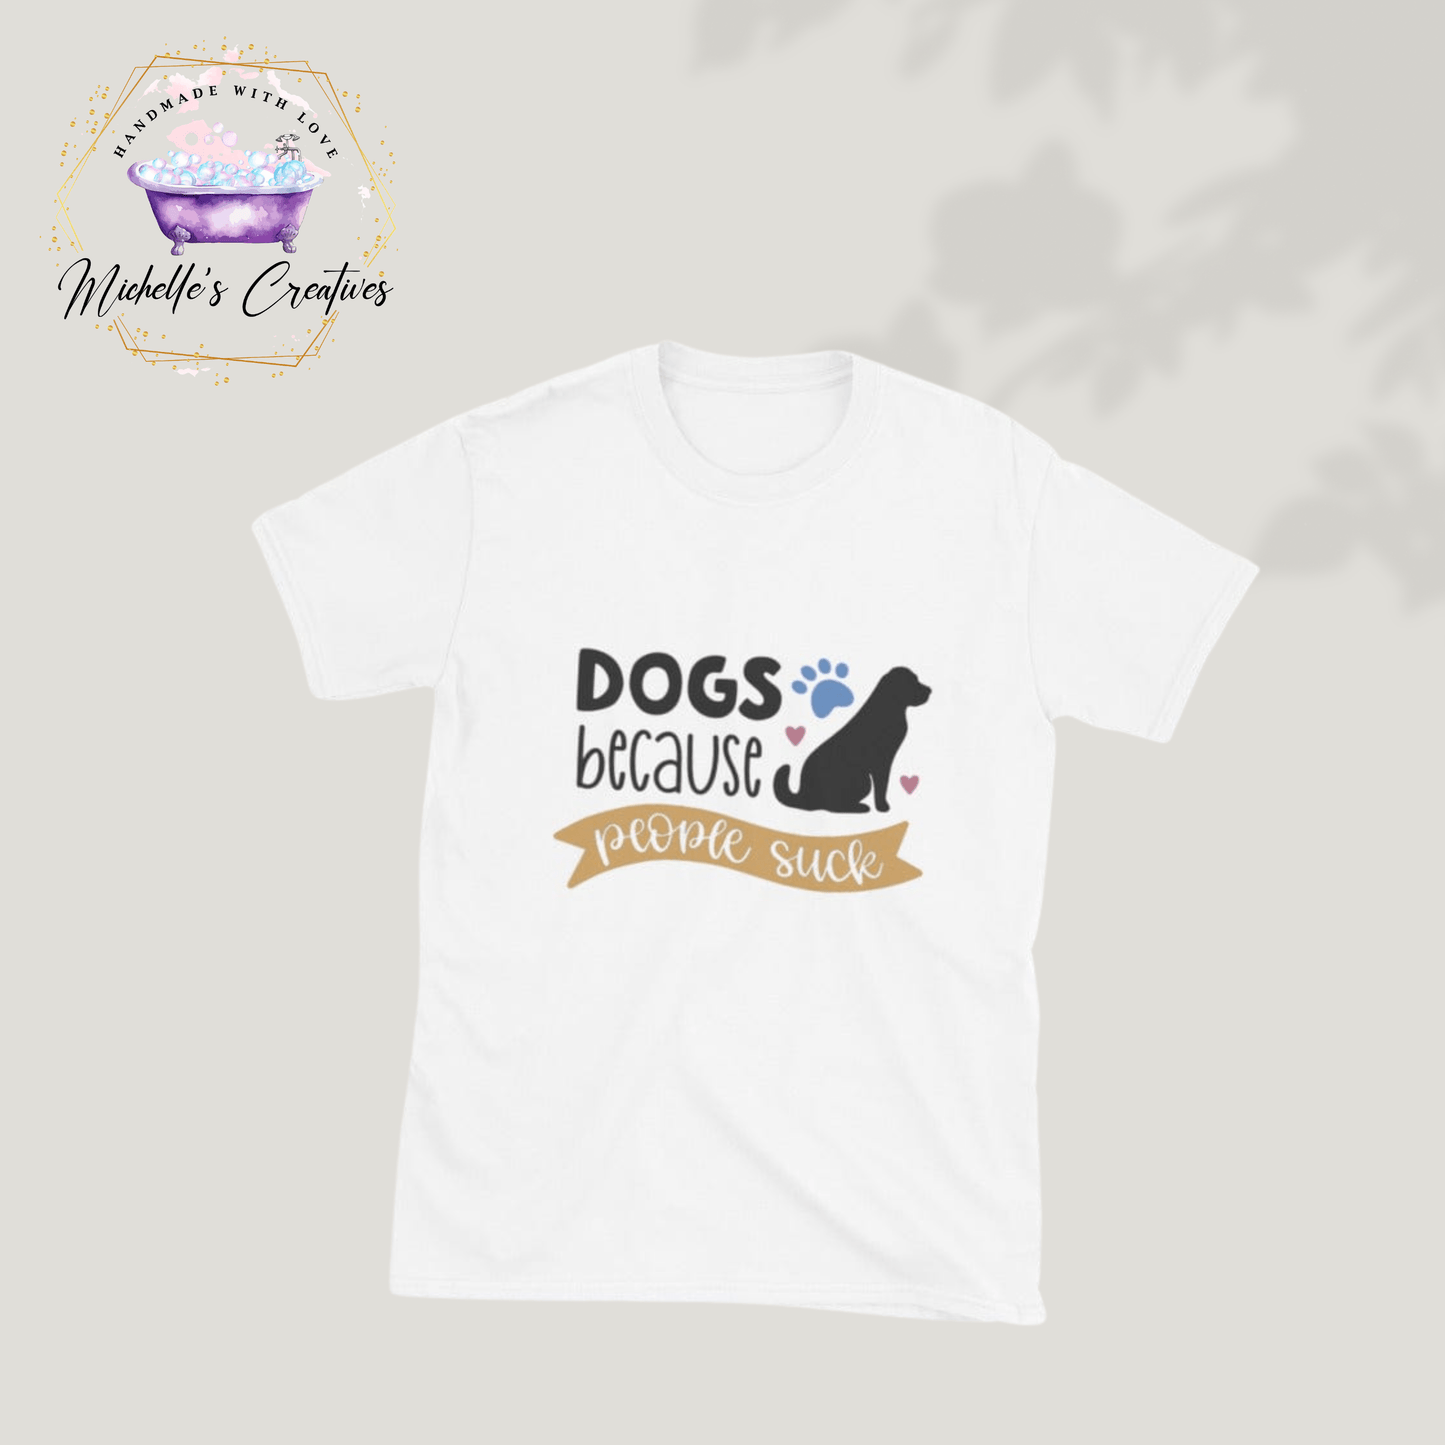 Michelle's Creatives White / S Dogs Because People Suck Short-Sleeve Unisex T-Shirt 6395807_473